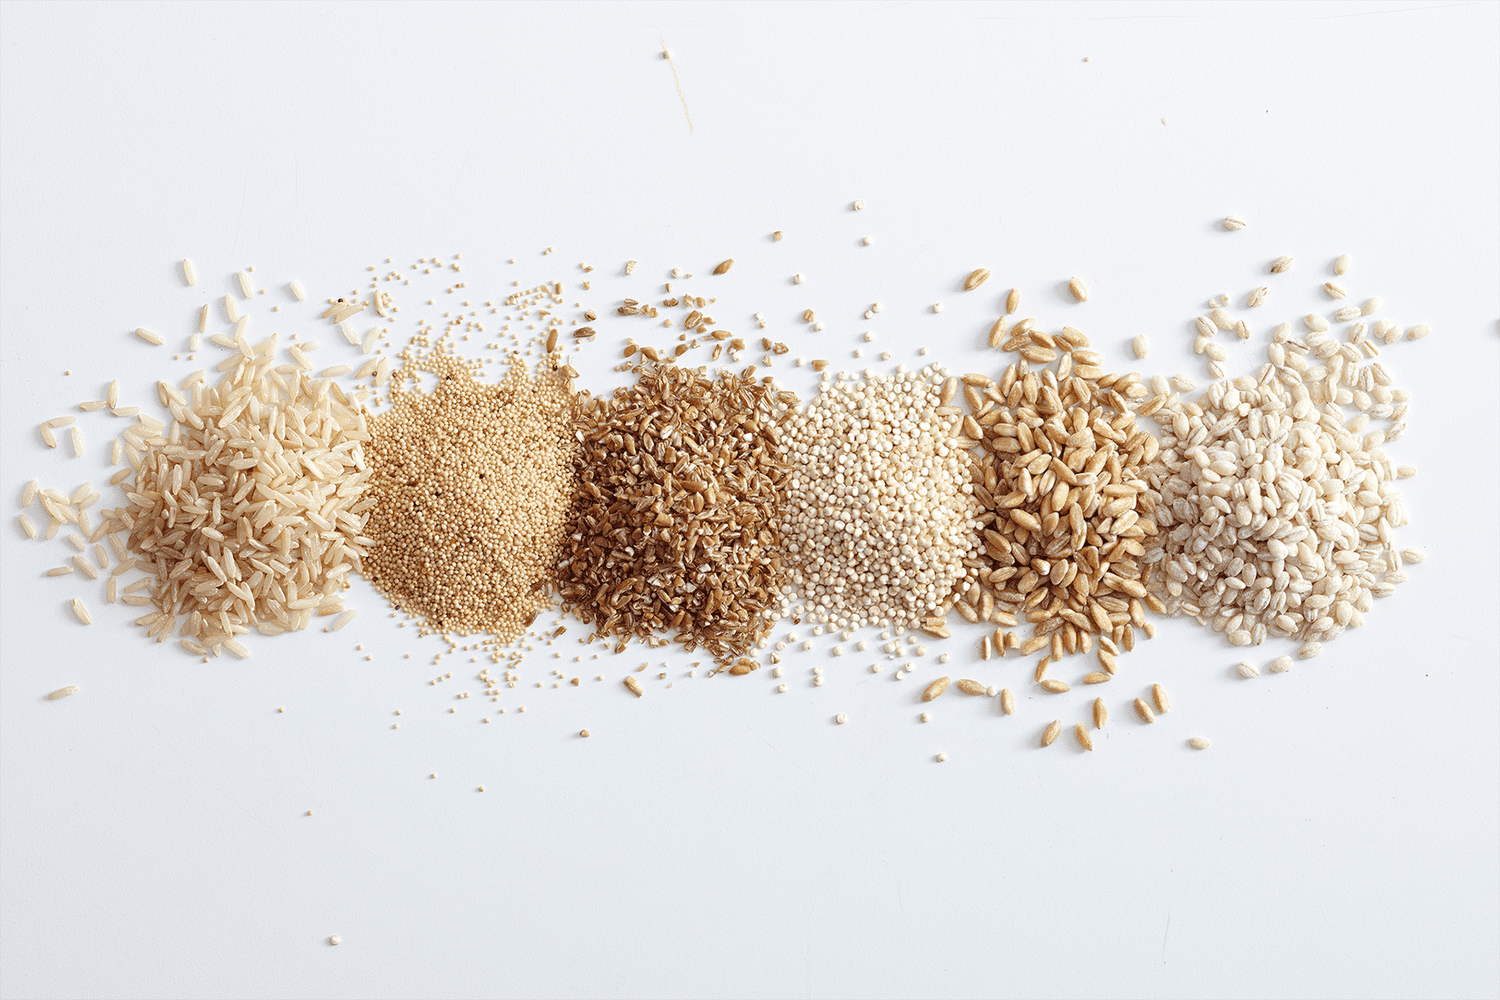 six piles of whole grains and rices side by side on a white background